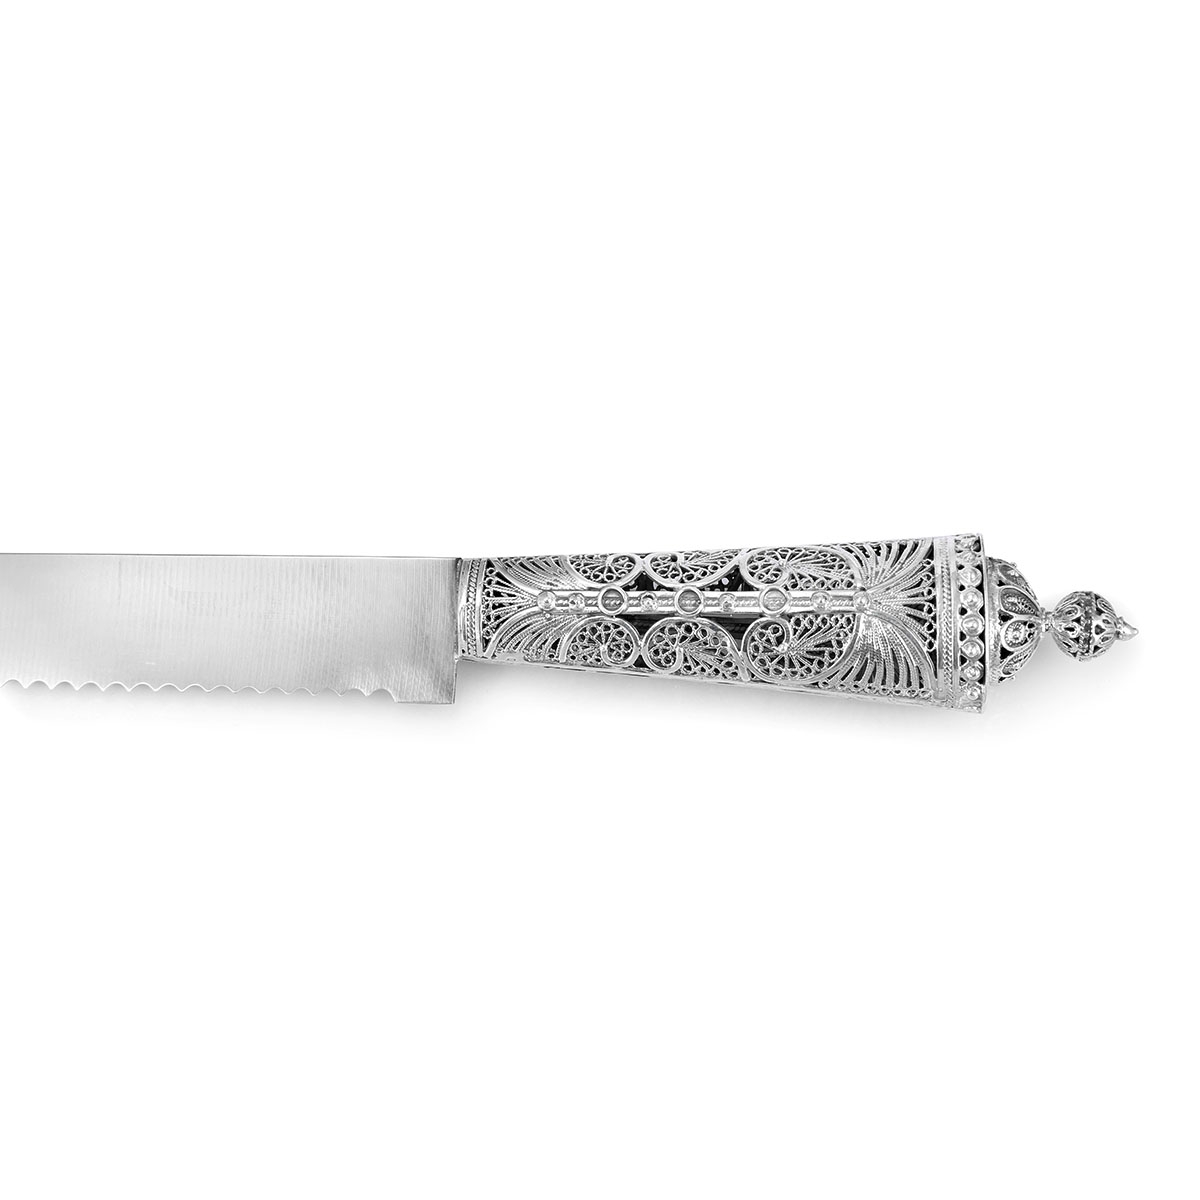 Traditional Yemenite Art Handcrafted Sterling Silver Challah Knife With Majestic Filigree Design - 1